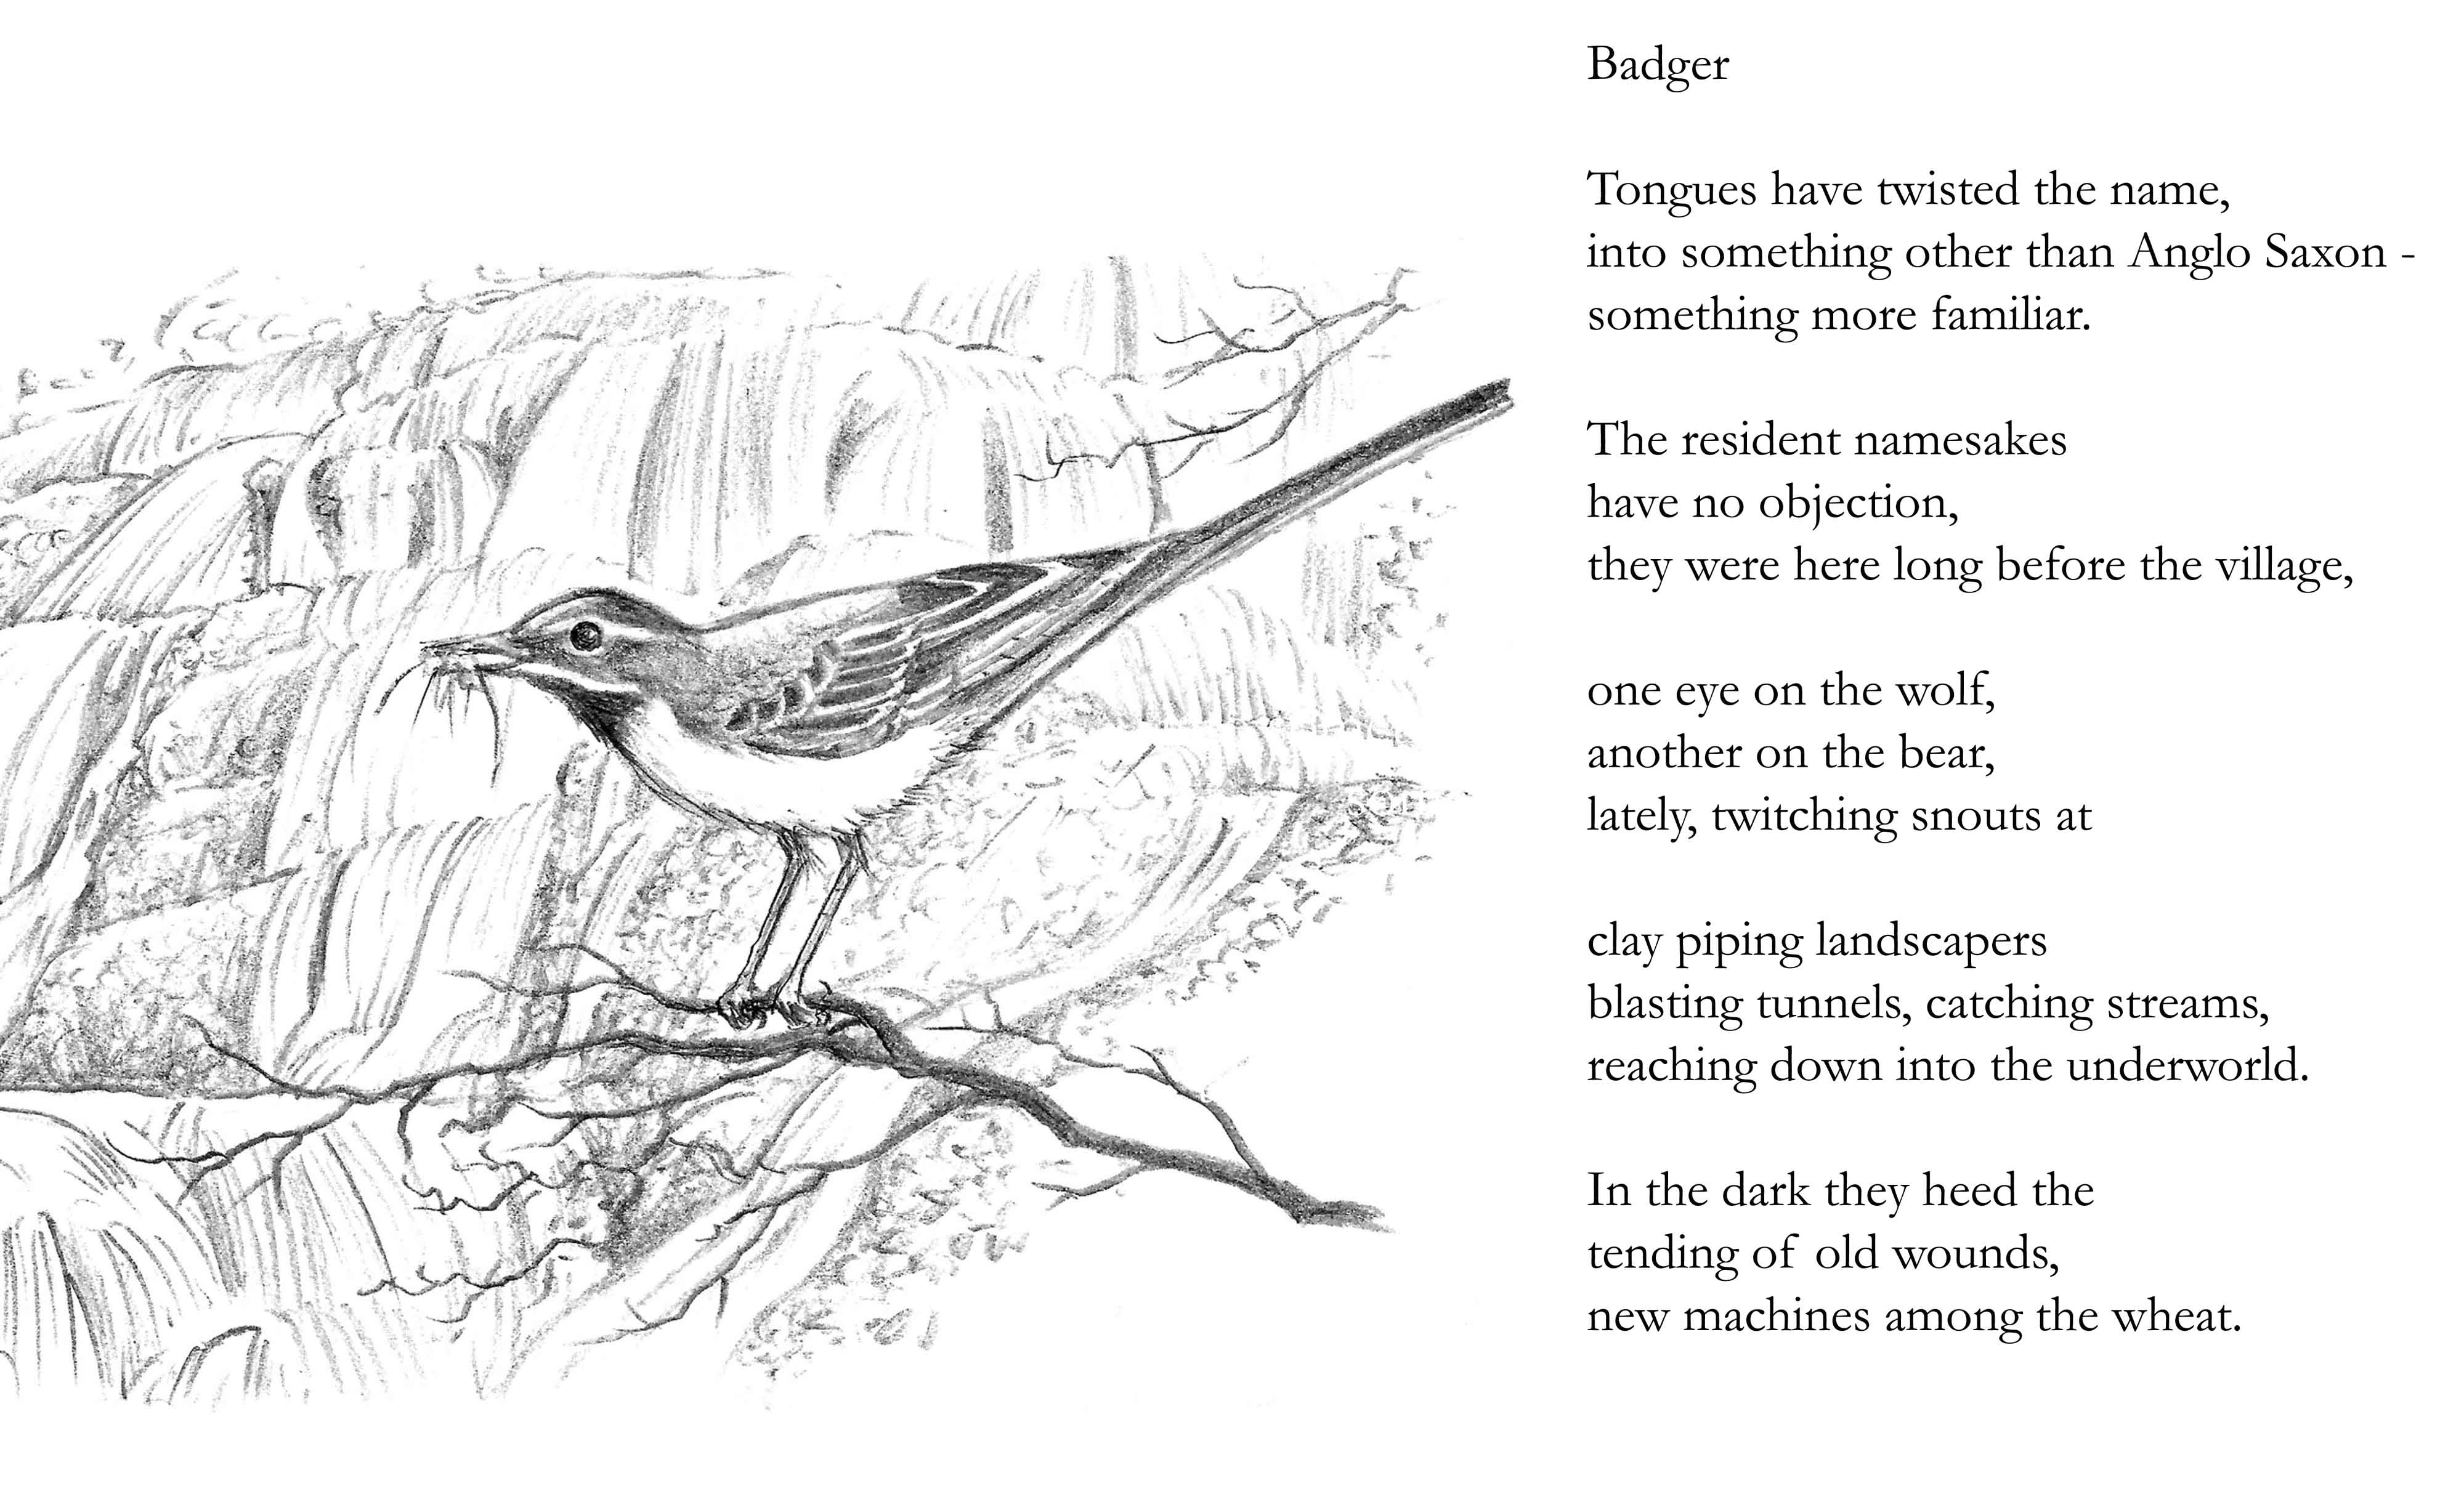 Grey wagtail in front of the waterfall at Badger Dingle, poem,'Badger' is part of the artwork here